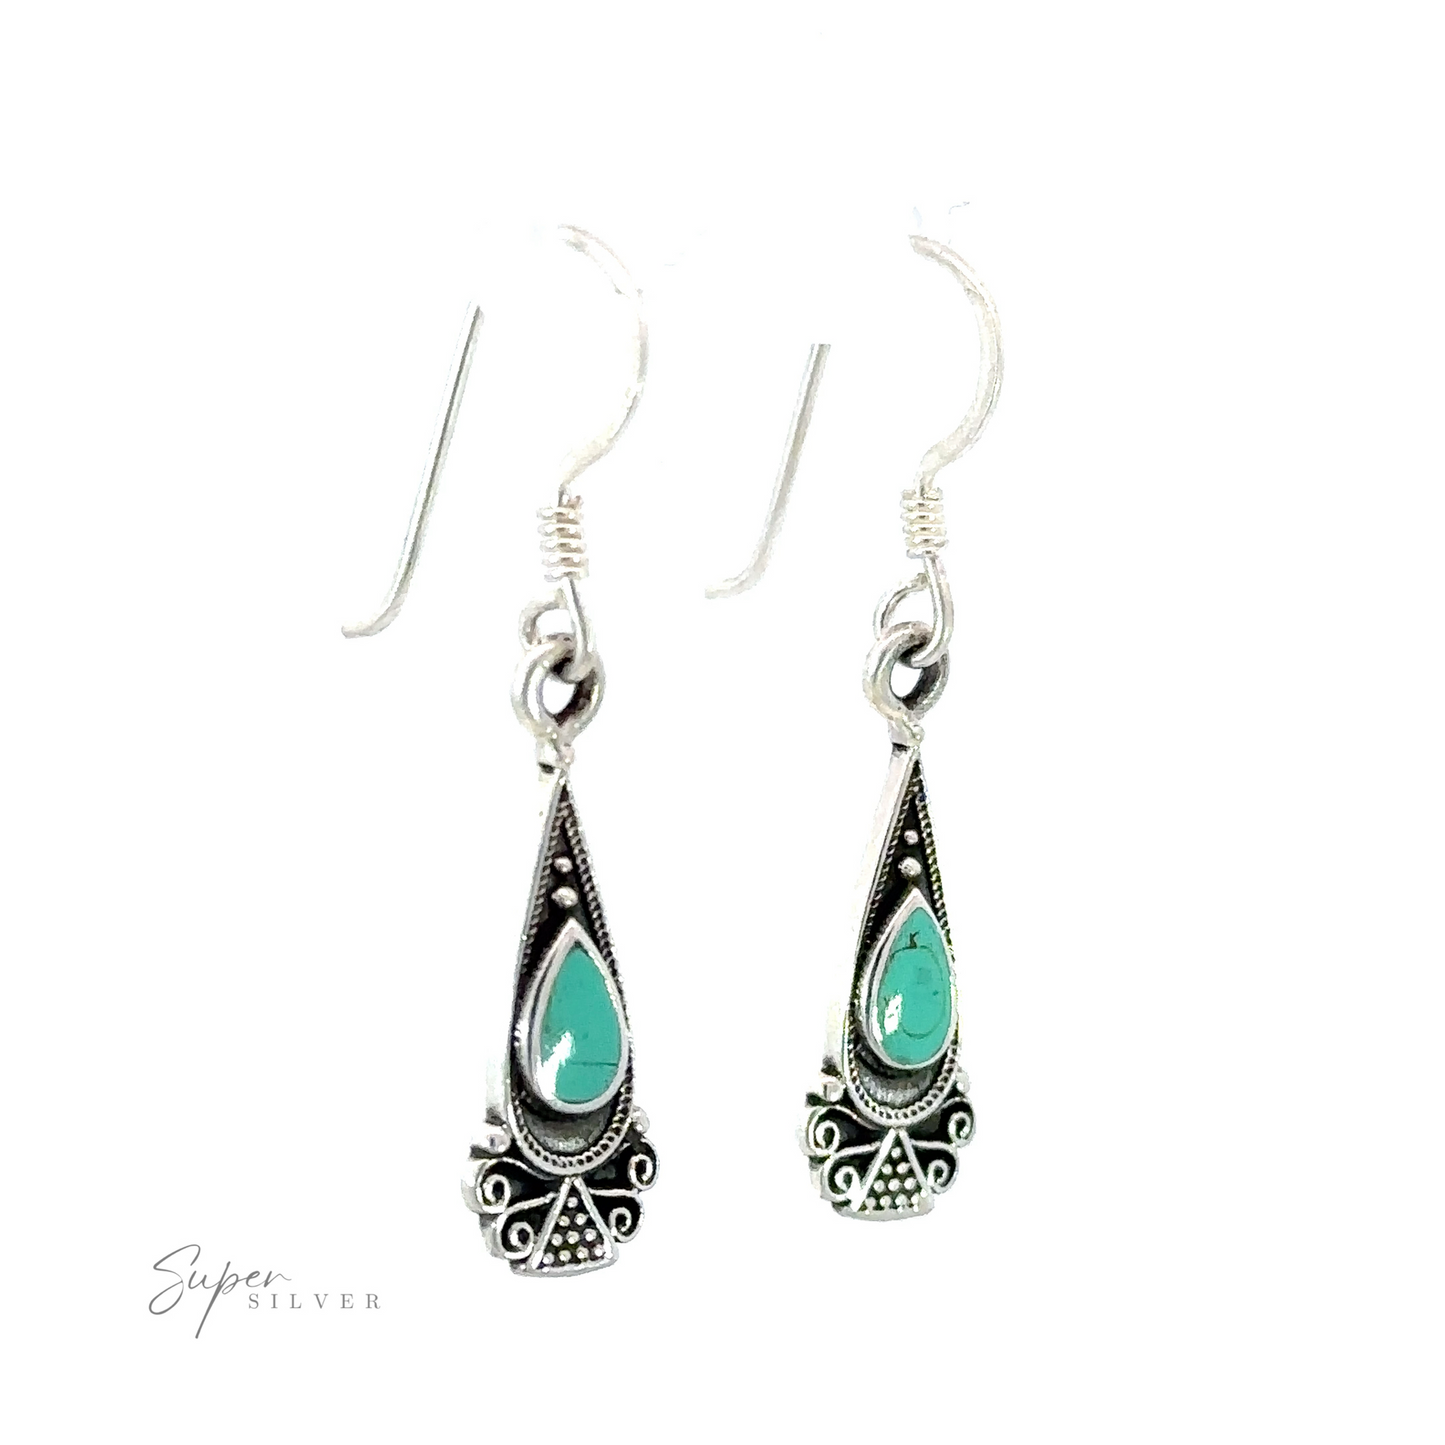 
                  
                    Bali Inspired Teardrop Shaped Earrings With Inlay Stones featuring inlaid turquoise stones.
                  
                